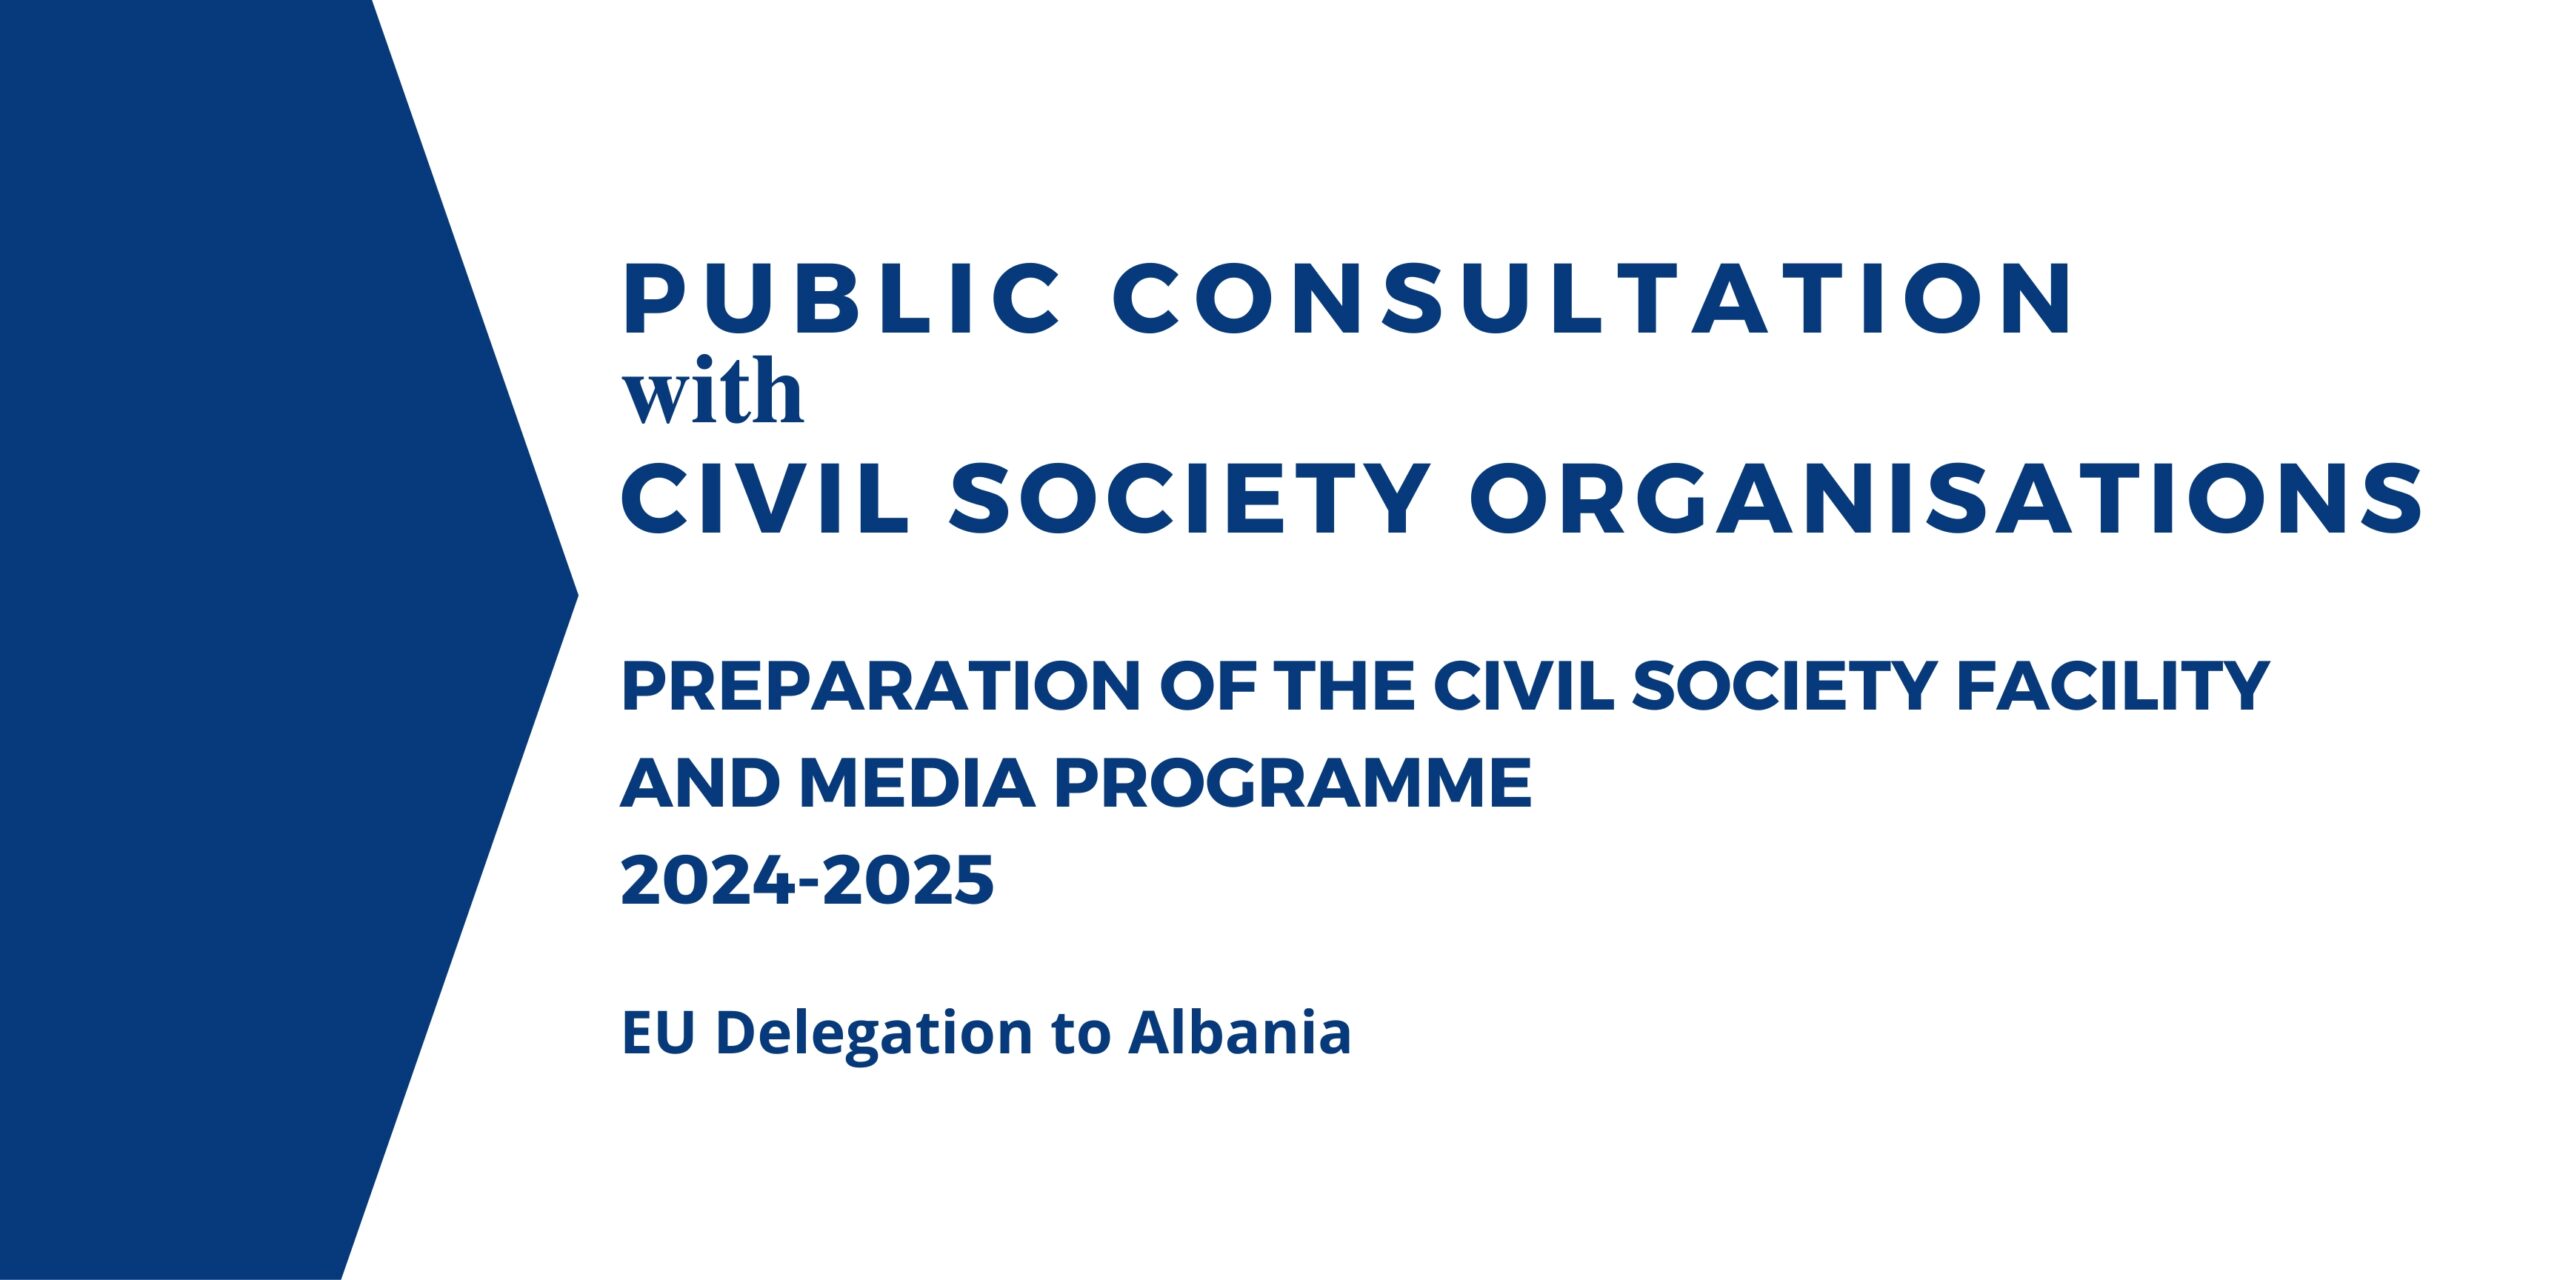 Public Consultation with Civil Society Organisations on the preparation of the Civil Society Facility and Media Programme 2024-2025